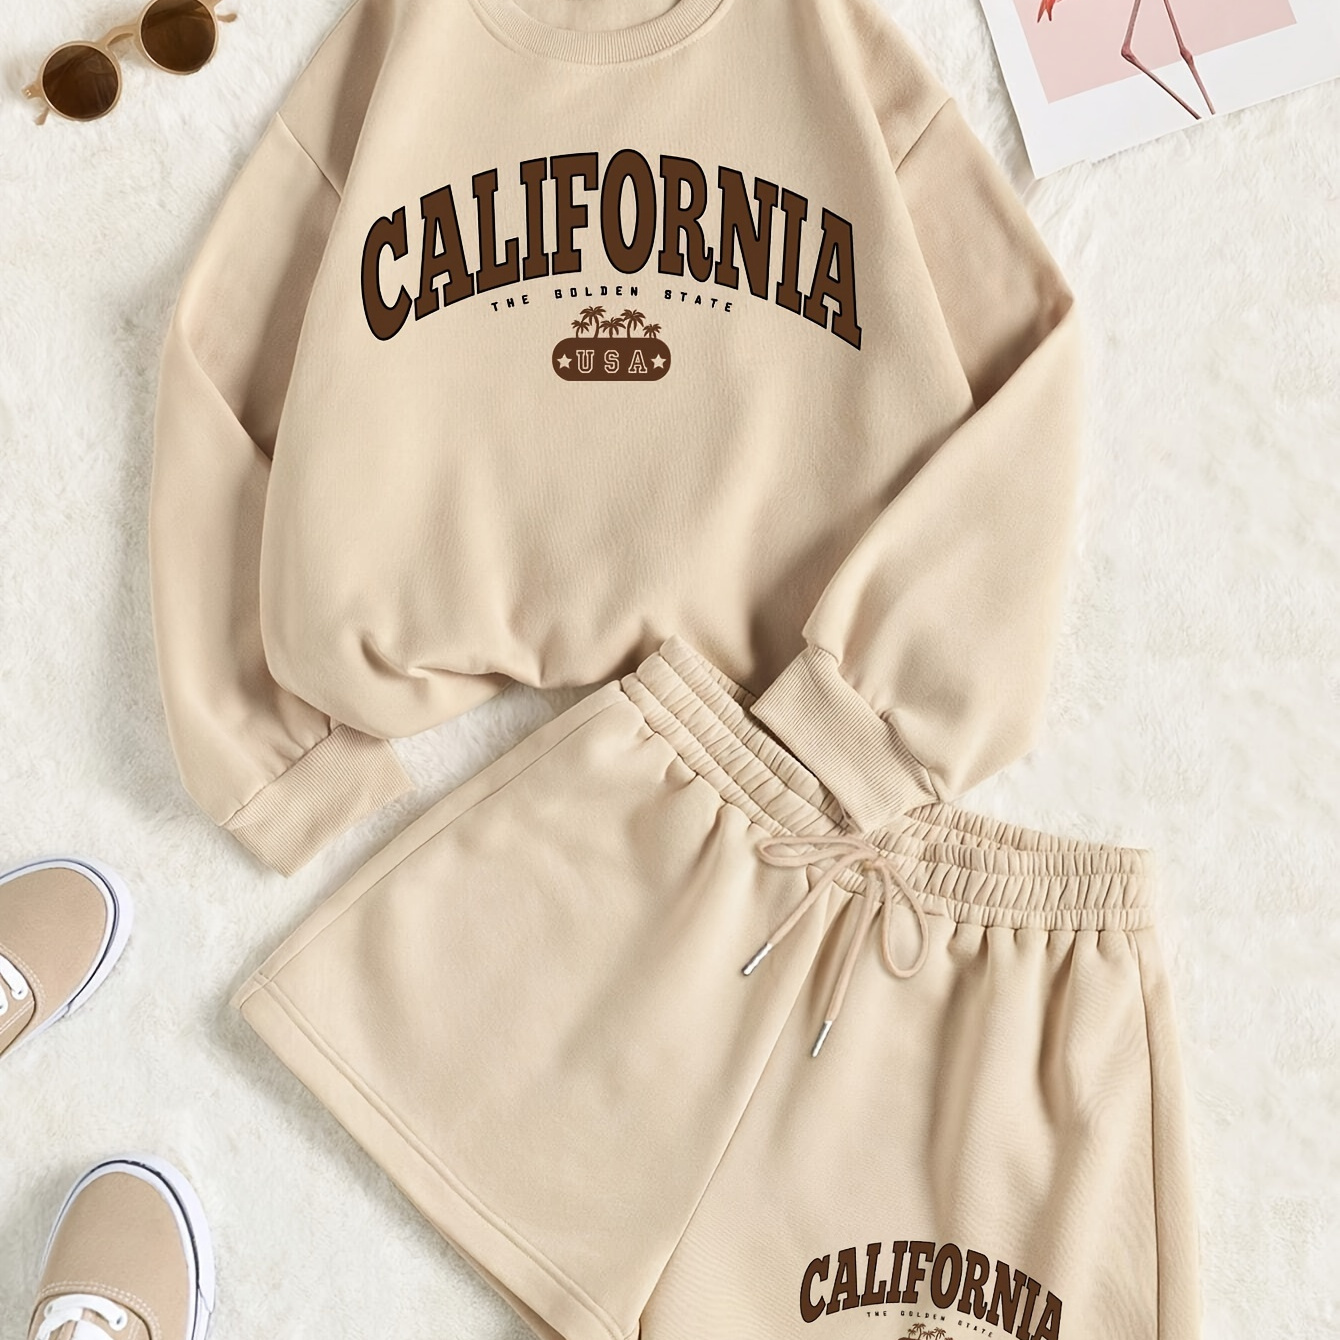 

Women's Crew Neck "california" Graphic Sweatshirt And Drawstring Waist Shorts Set, Casual Sporty Loungewear Outfit